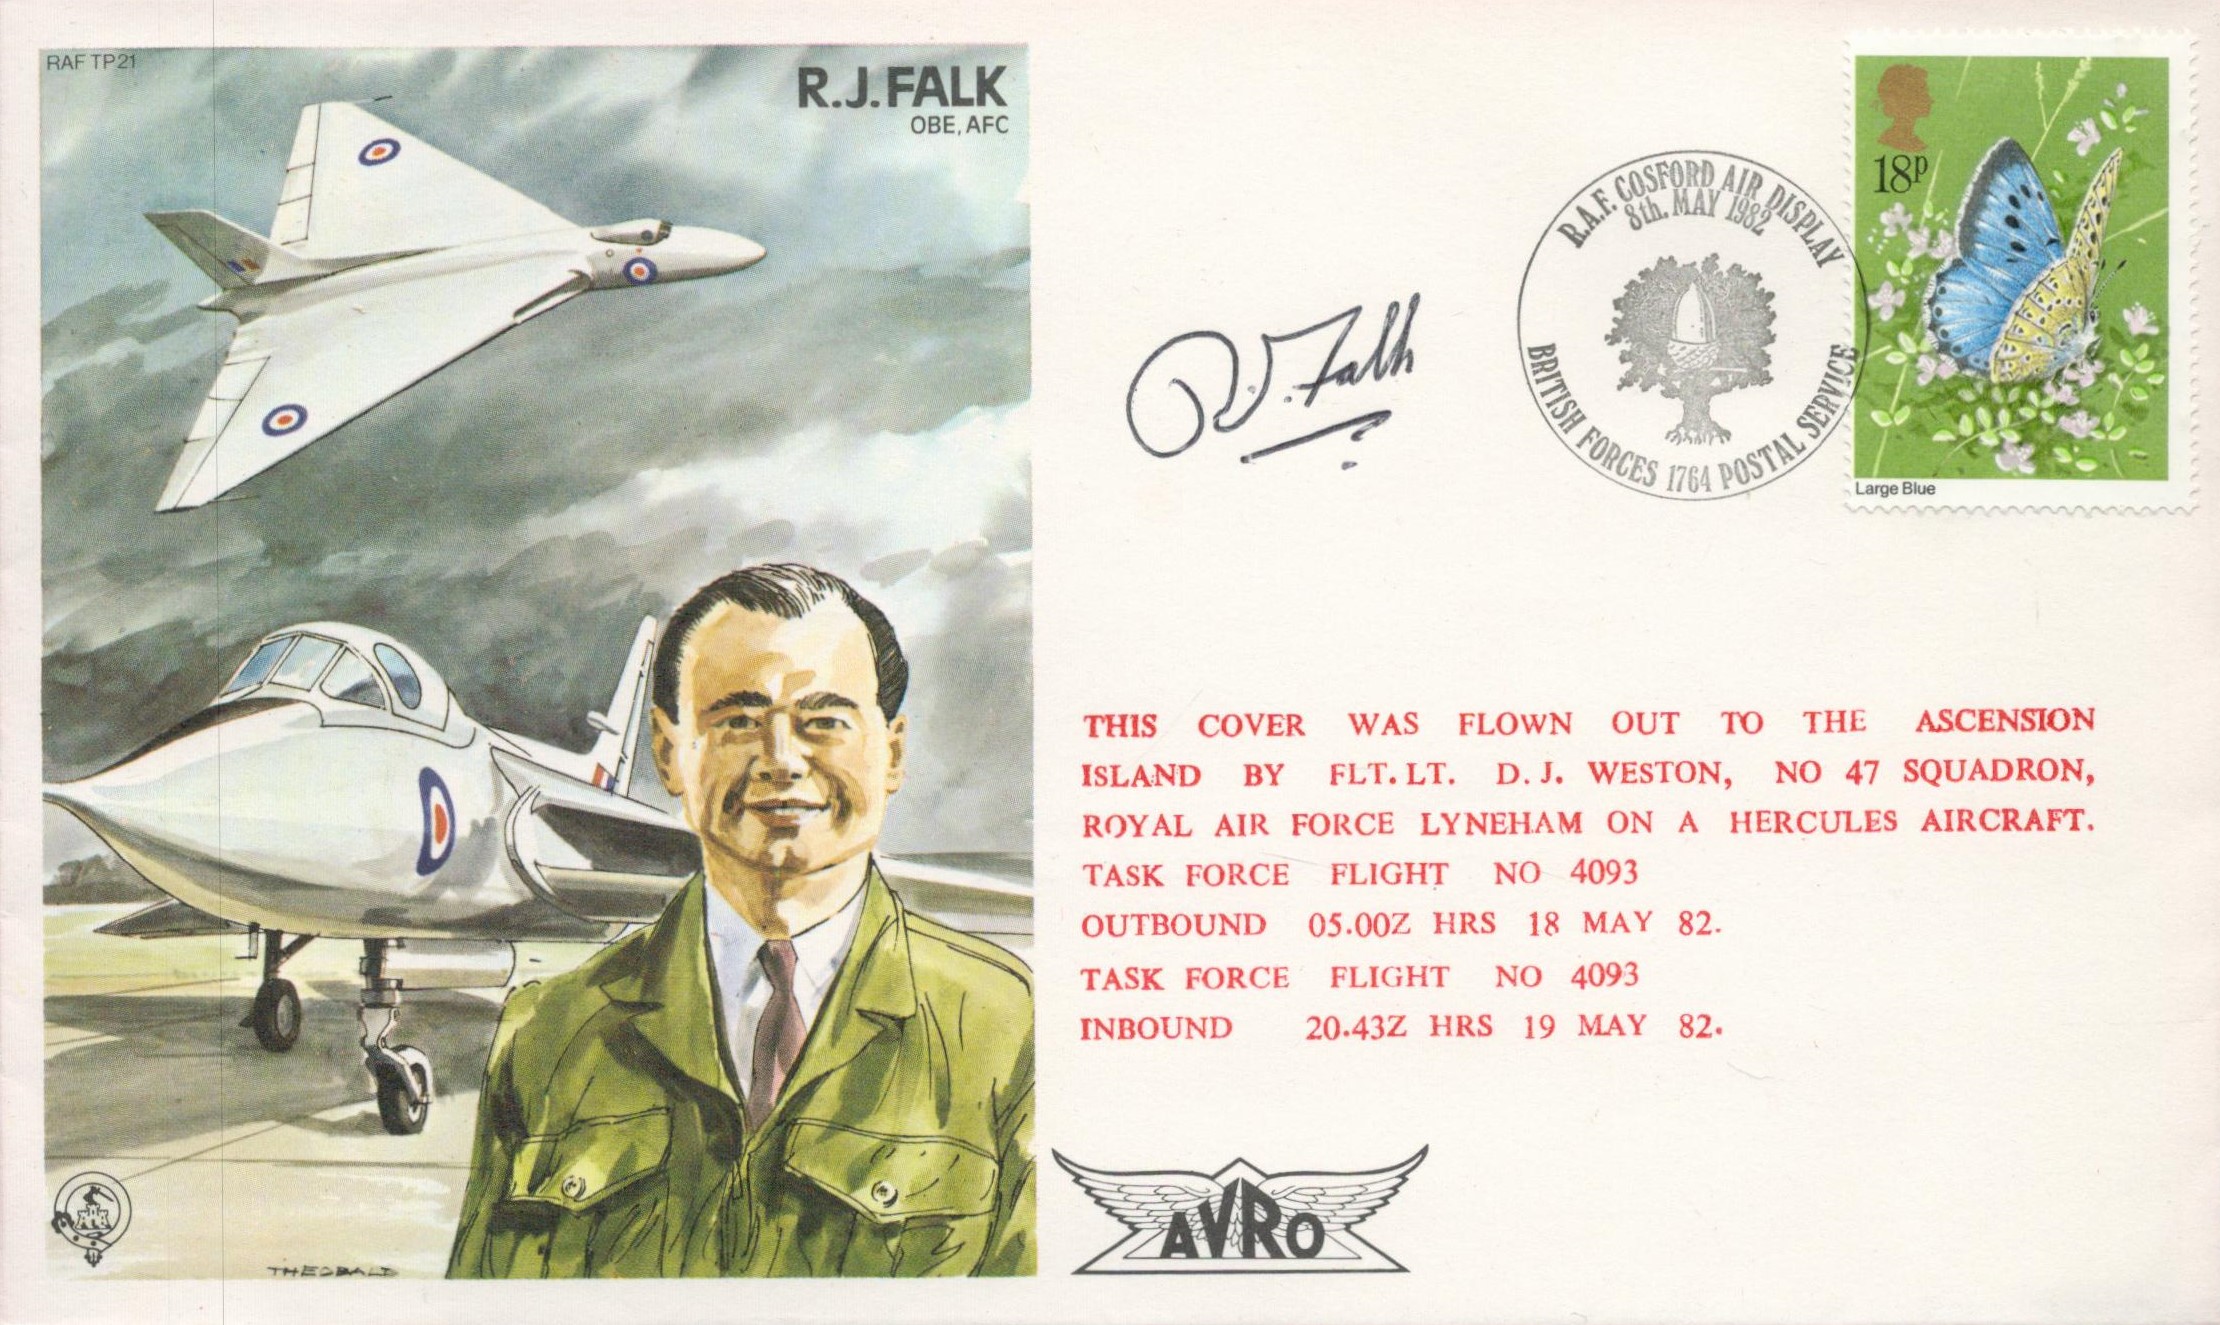 RJ Falk OBE AFC Signed Personal Cover 942 1083 RAF TP21. Flown in a Hercules. British 18p Stamp with